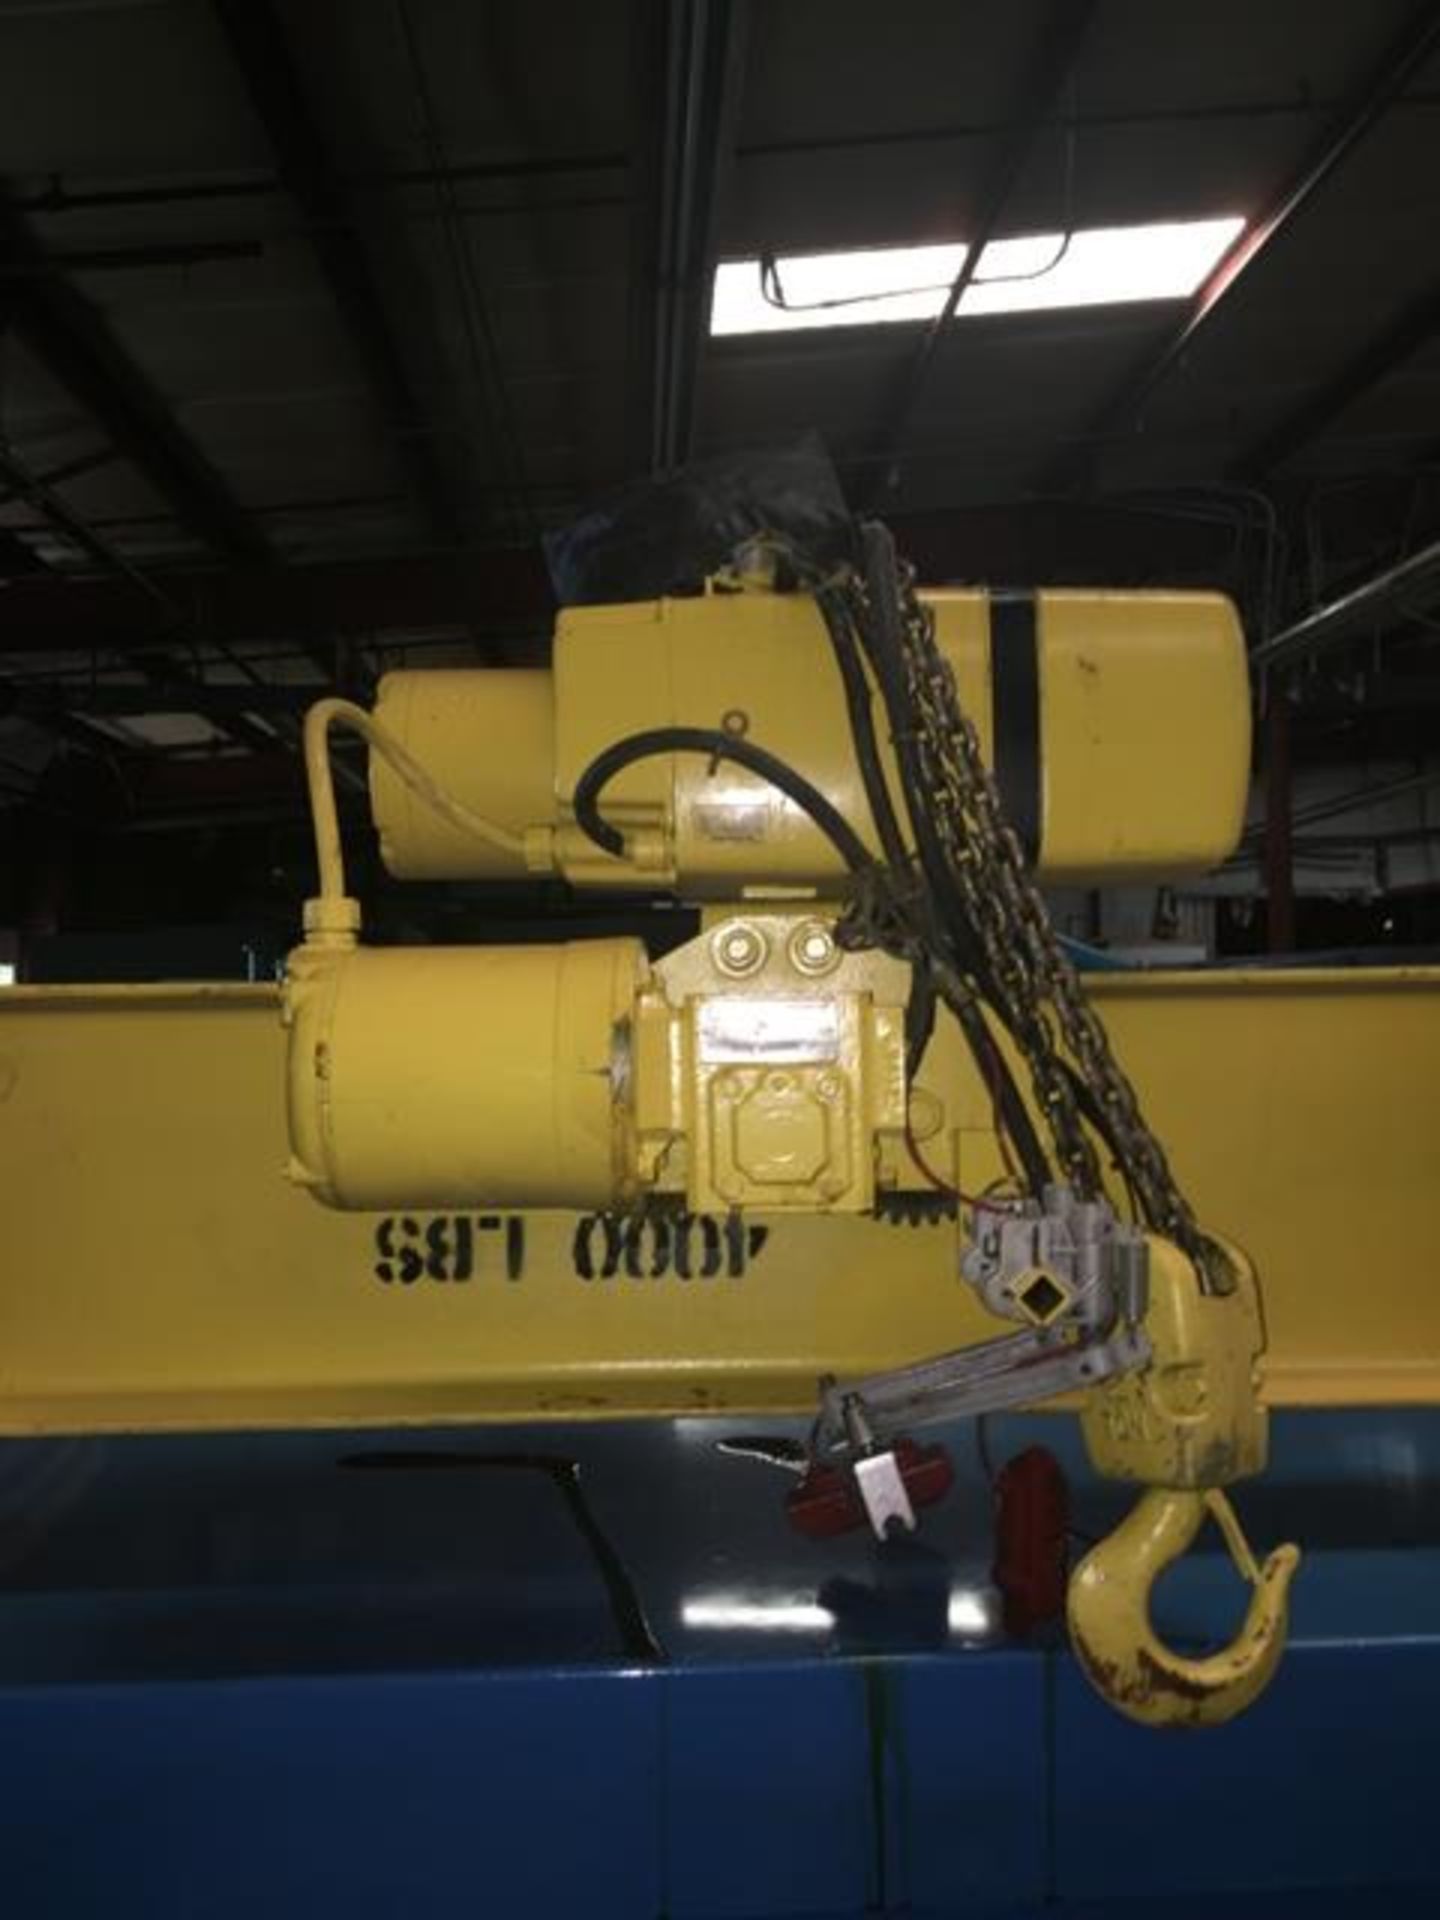 Yale Motorized Chain Hoist & I-Beam, 220 Volts, ID# 645292310, I-Beam Length 250 Inches Excellent Co